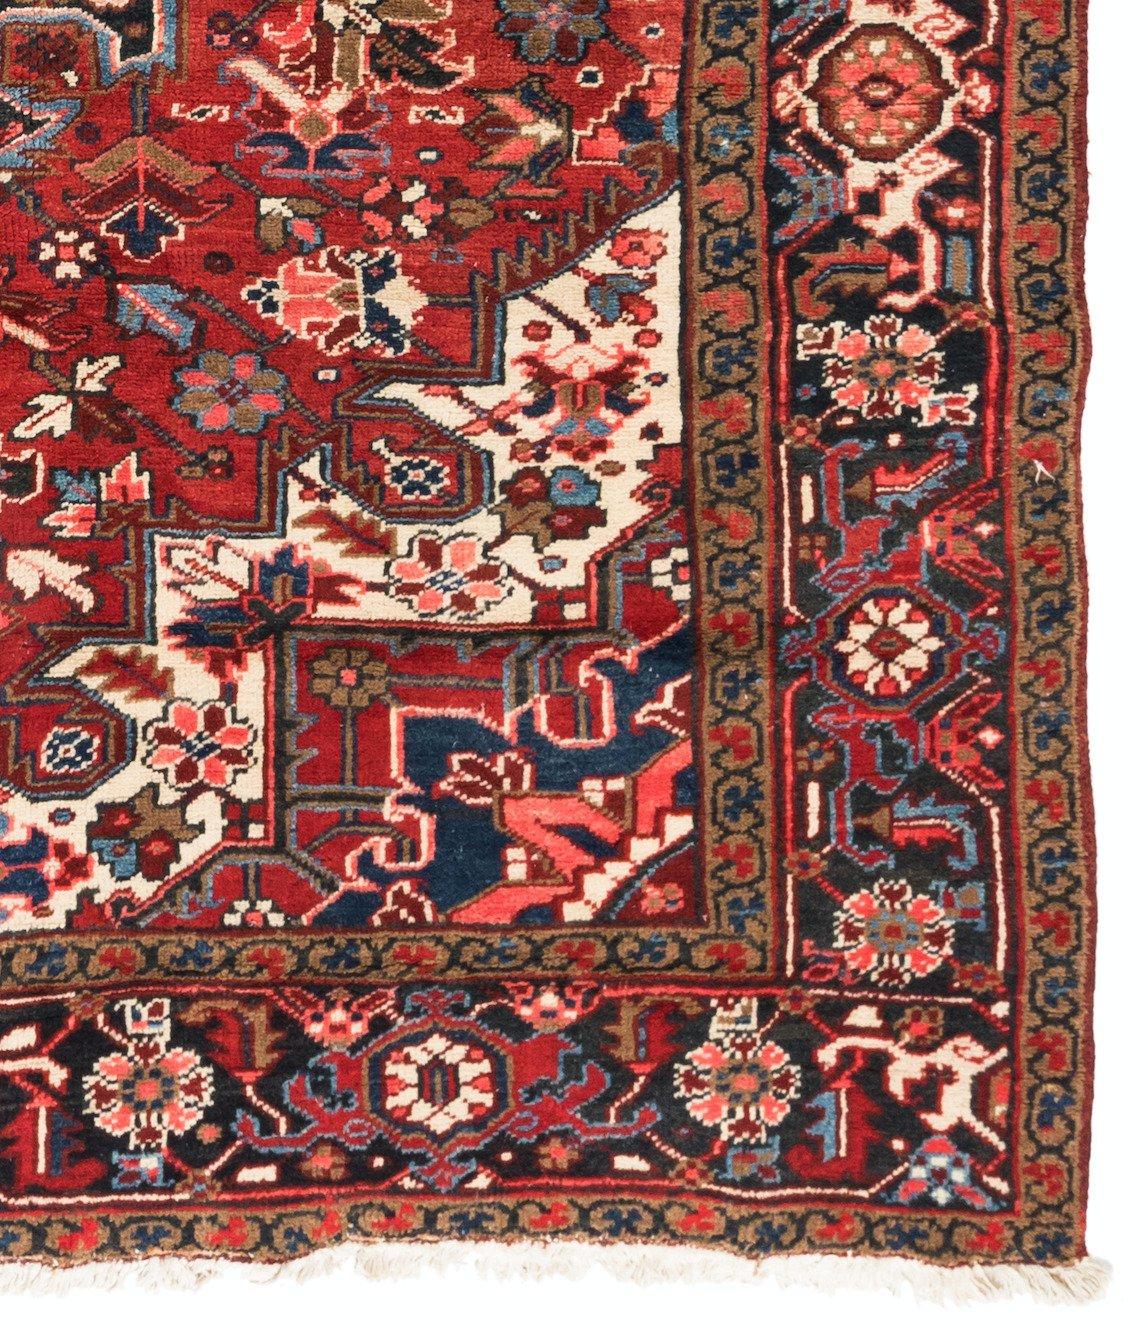 Hand-Knotted Antique Vintage Persian Red Ivory Navy Blue Square Heriz Rug circa 1950s